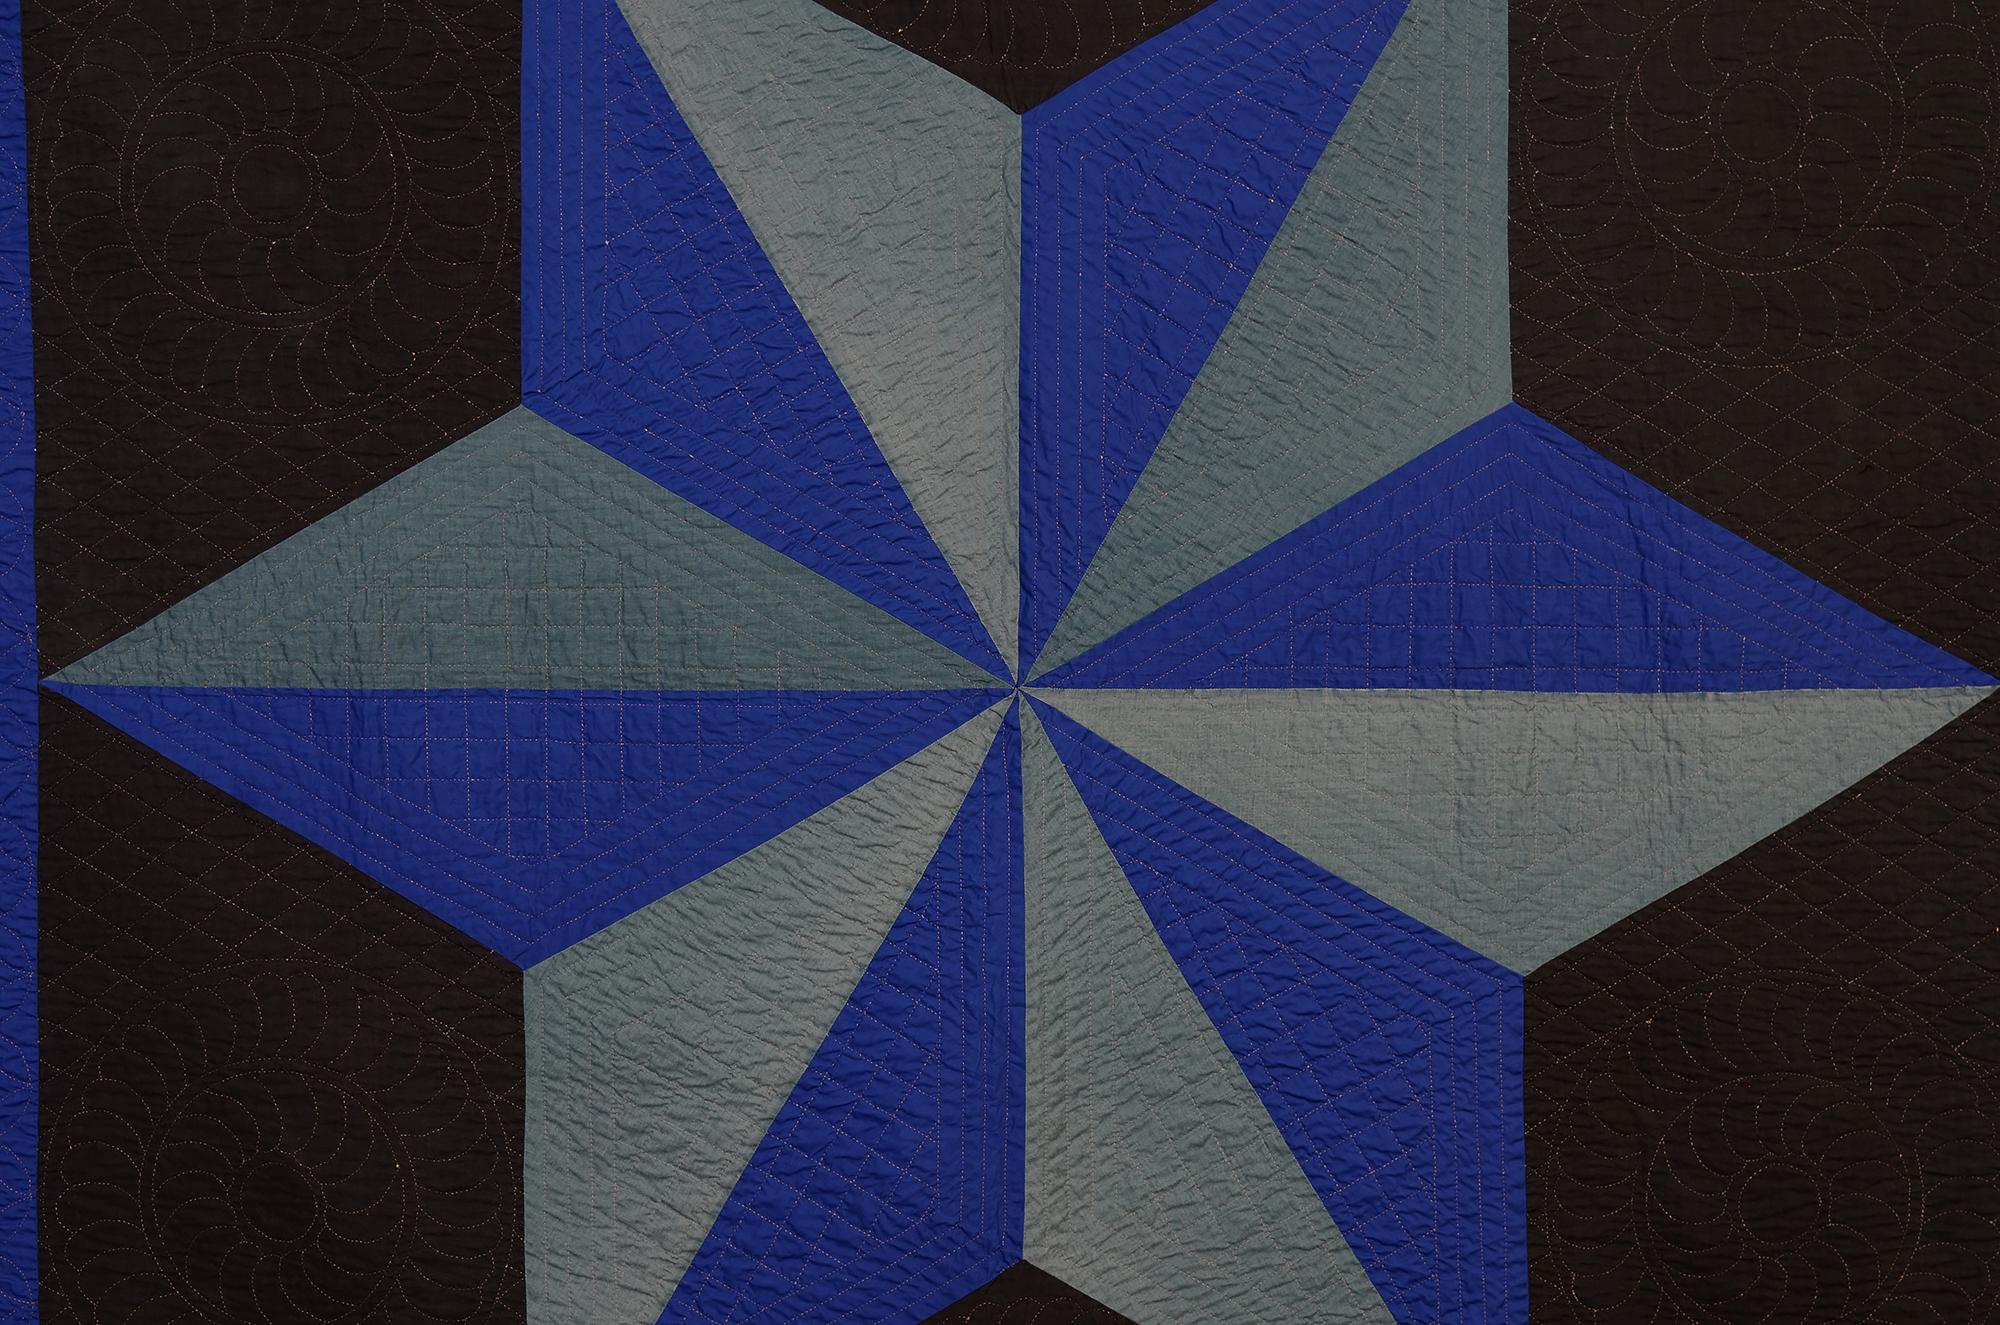 This most unusual Ohio Amish quilt might go by either the name Star of the East or North Star. In either case, the six point star presents a powerful image. It is especially dramatic done on a black ground with two shades of blue creating three